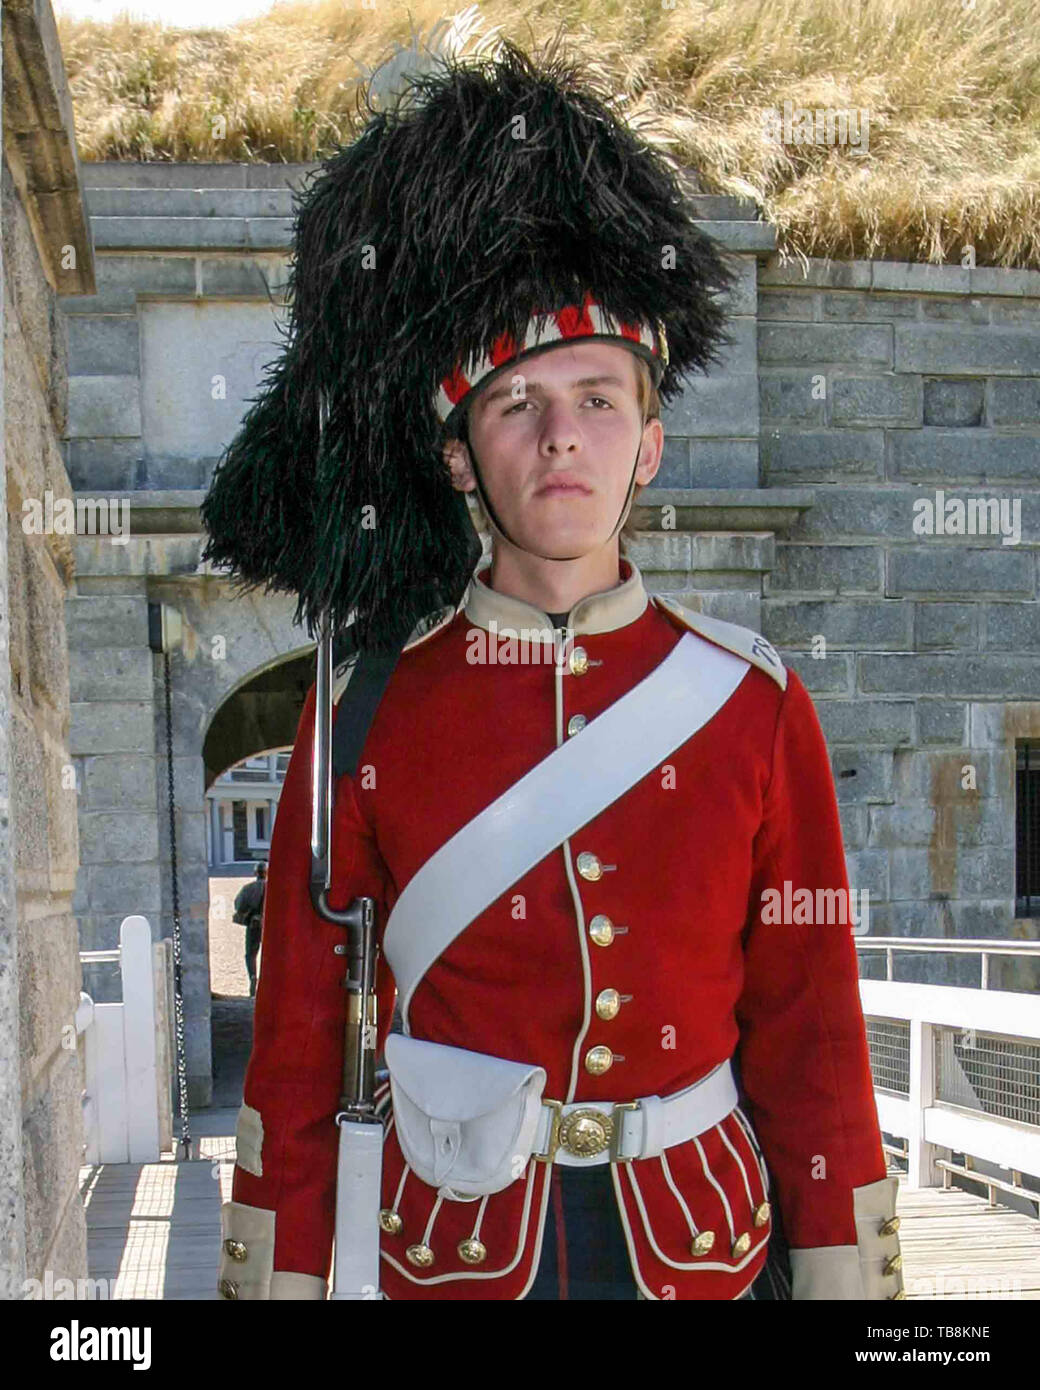 Halifax, Nova Scotia, Canada. 5th Sep, 2005. Standing at attention while on guard, re-enactors dressed as soldiers of the 78th Highland Regiment, on Citadel Hill (Fort George), a National Historic Site in Halifax, Nova Scotia. A living history museum, the fort is among the most visited sites in Atlantic Canada. Credit: Arnold Drapkin/ZUMA Wire/Alamy Live News Stock Photo